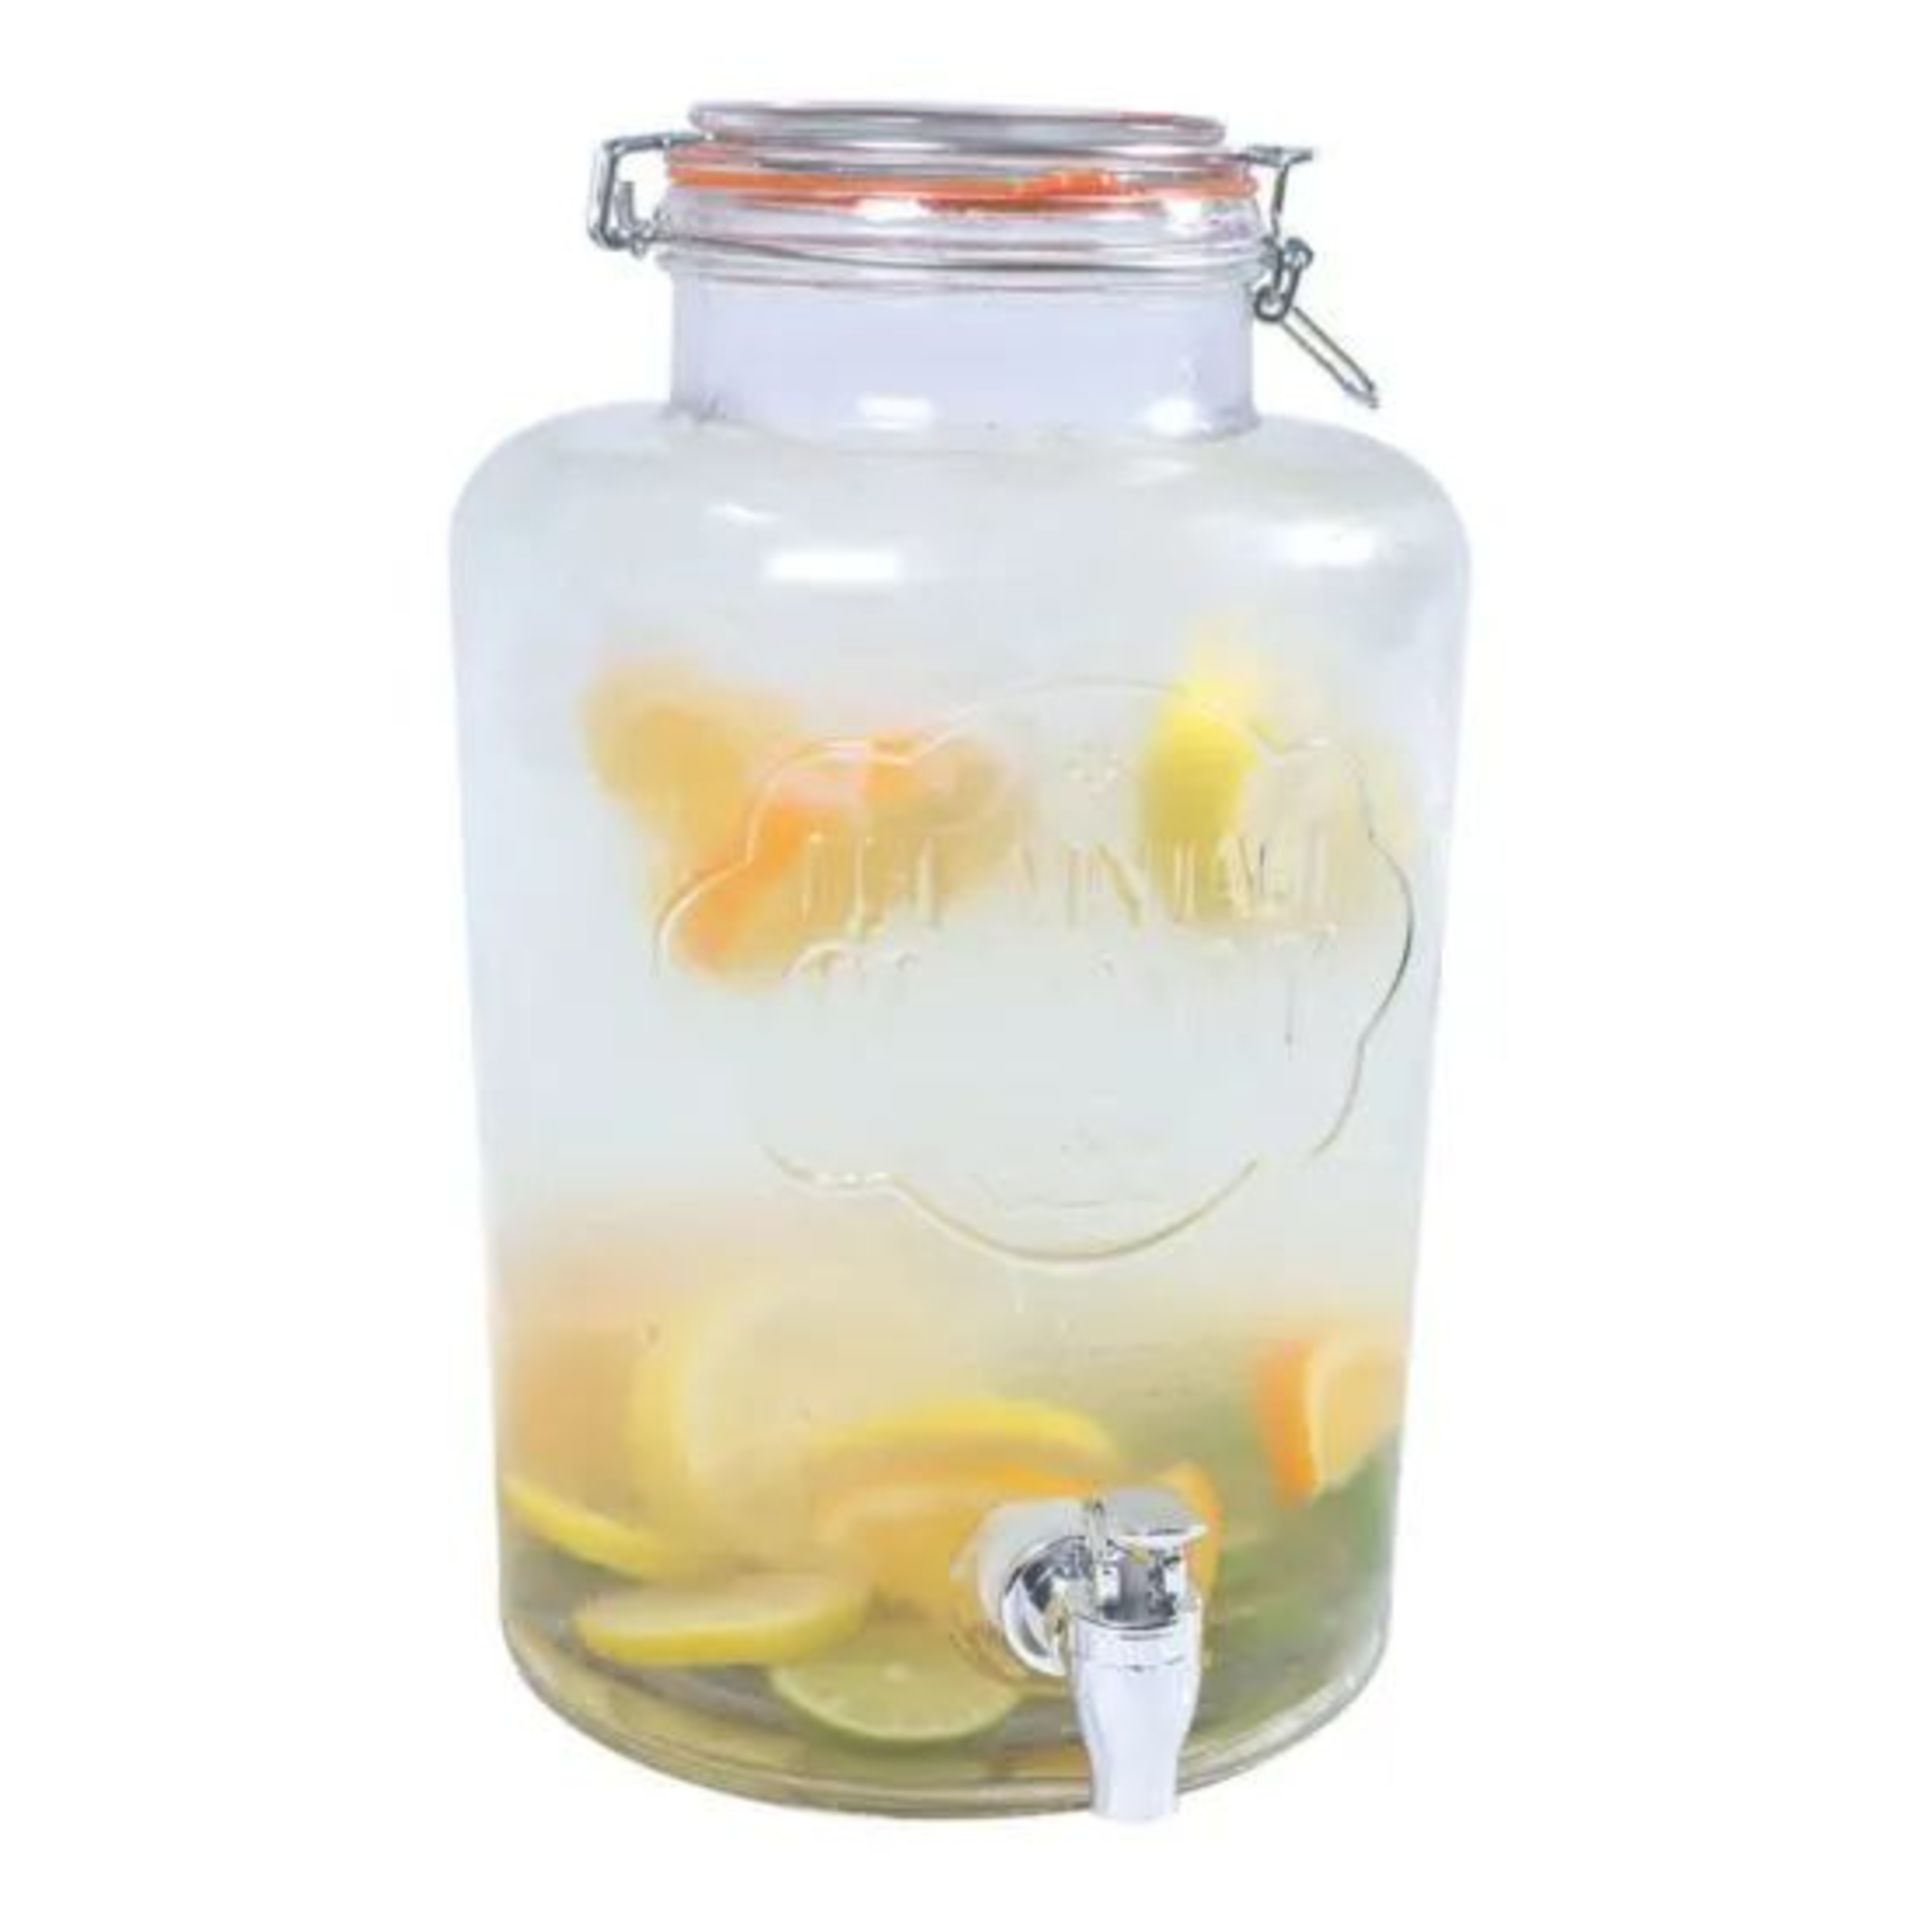 The Vintage Company 7.6L Airtight Glass Drinks Dispenser - Clear. - BW. Add the perfect finishing